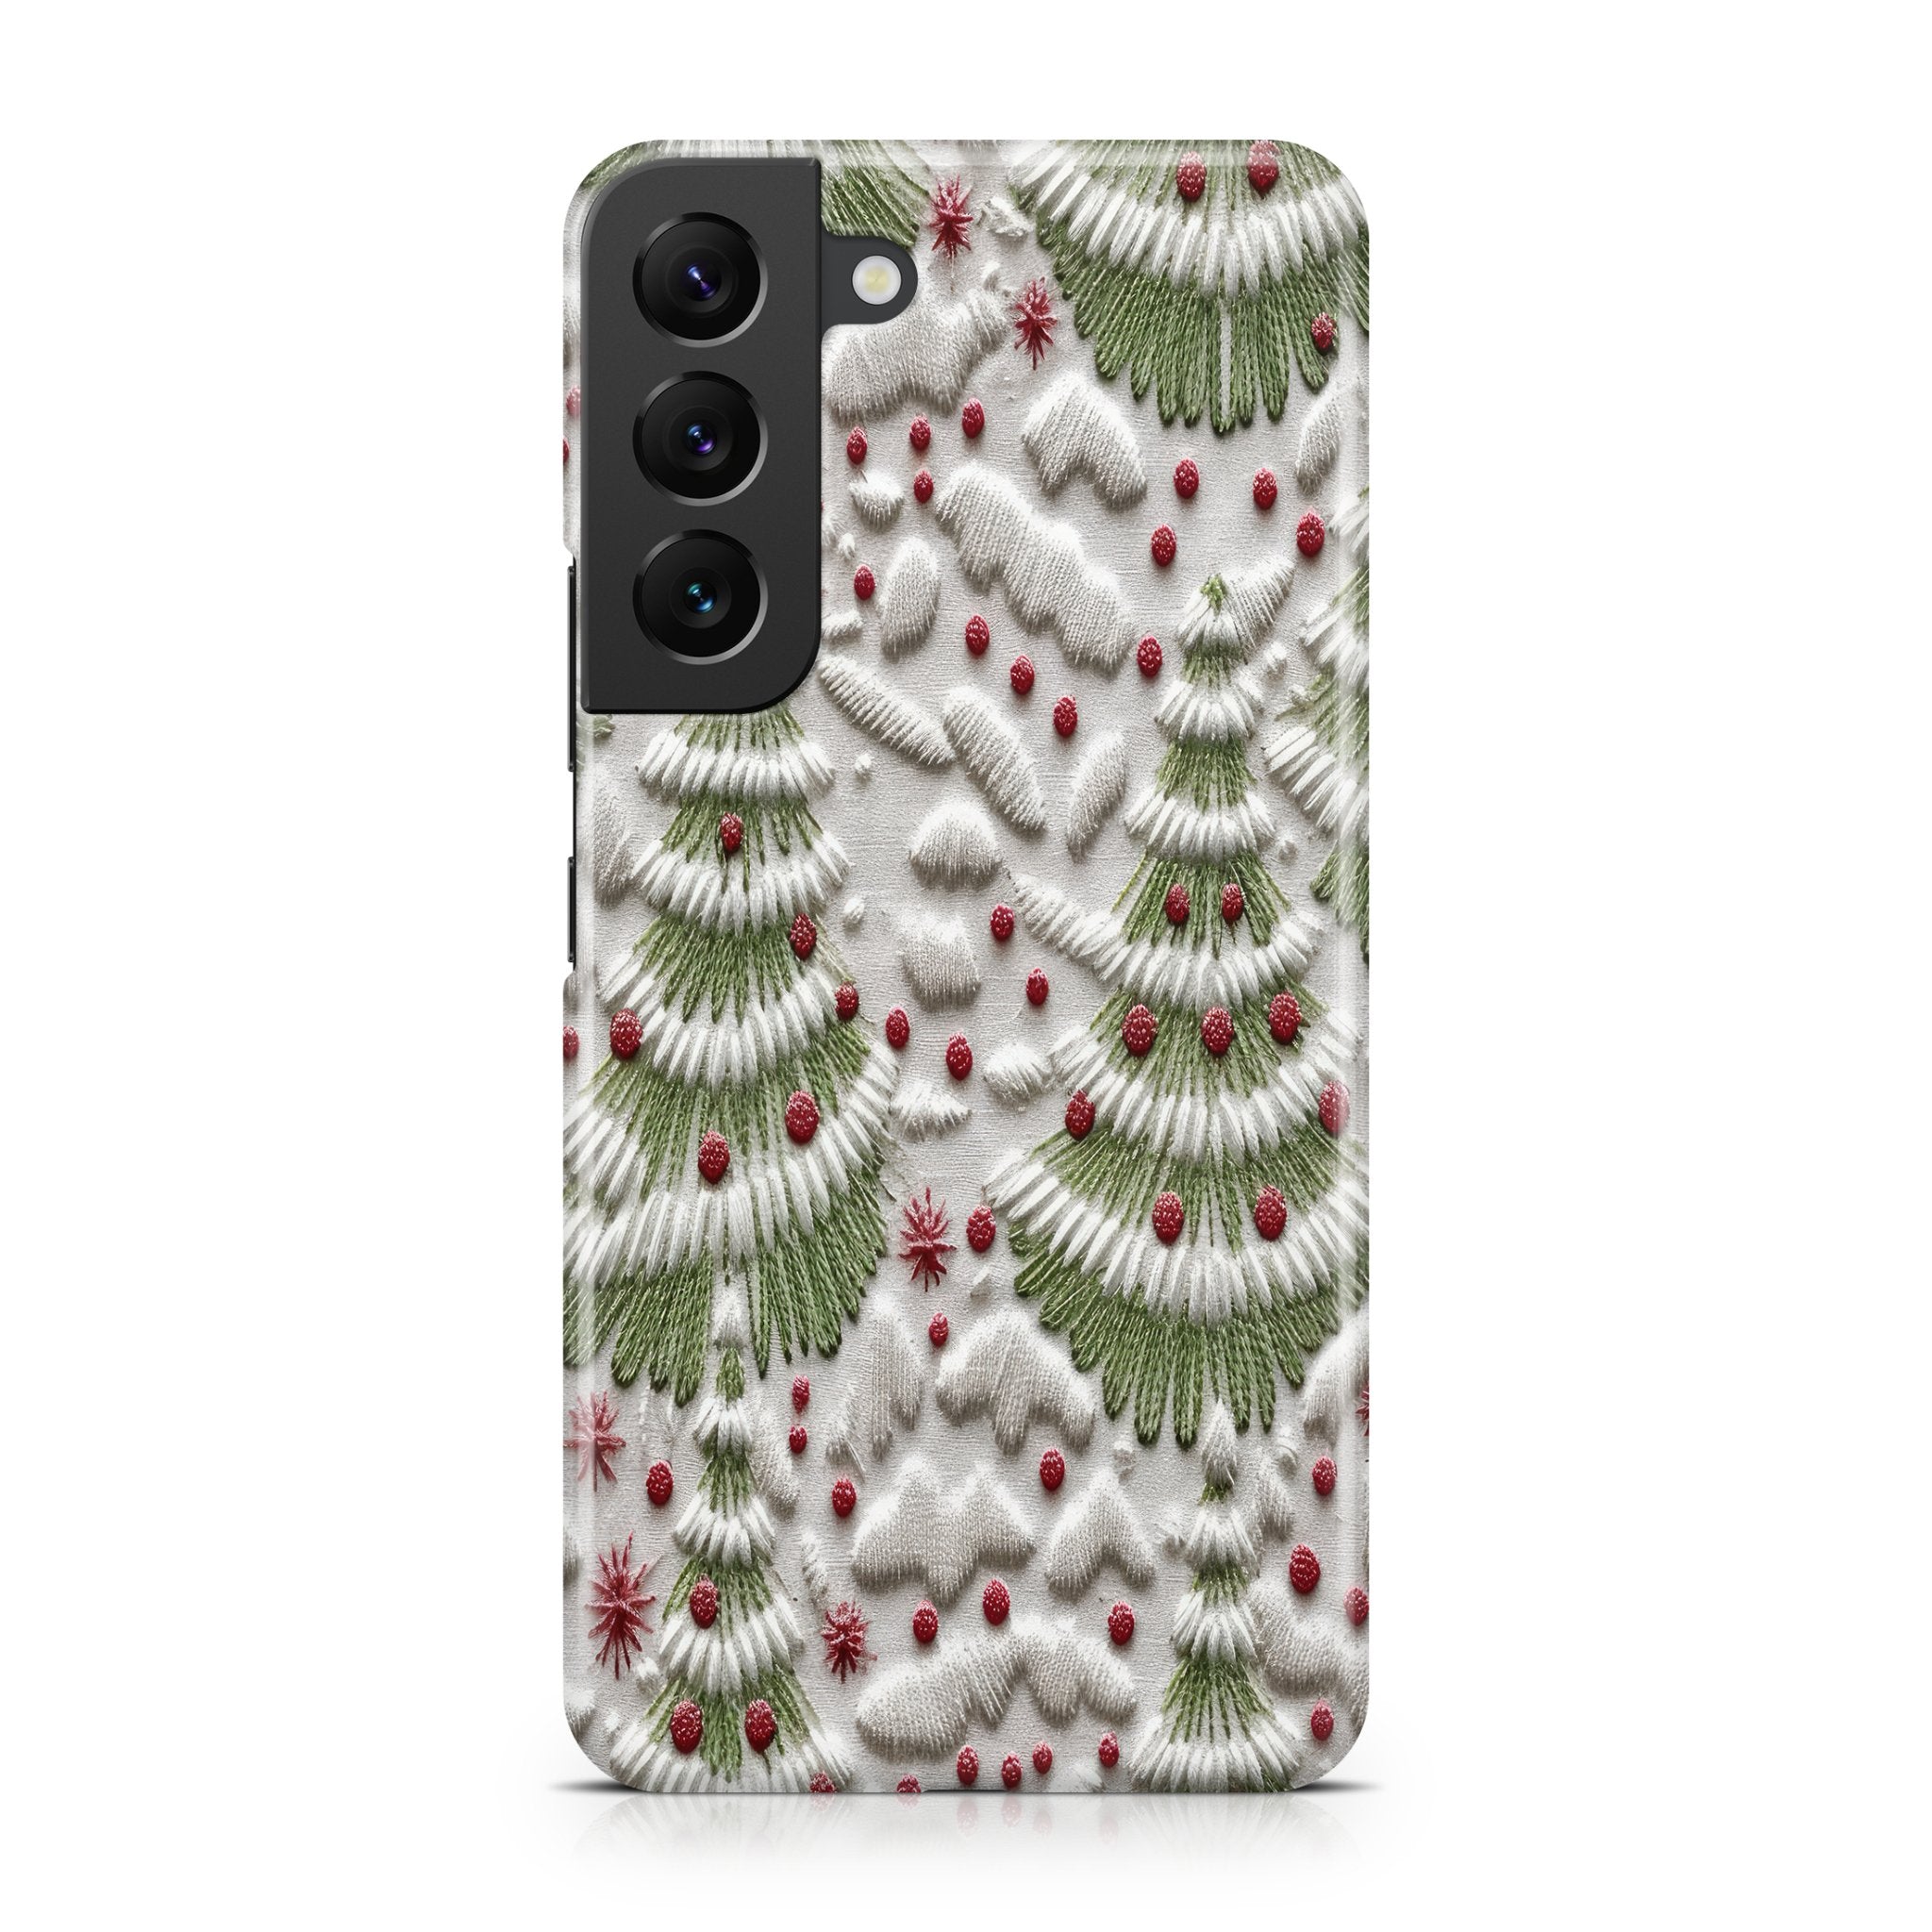 Winter Berries - Samsung phone case designs by CaseSwagger